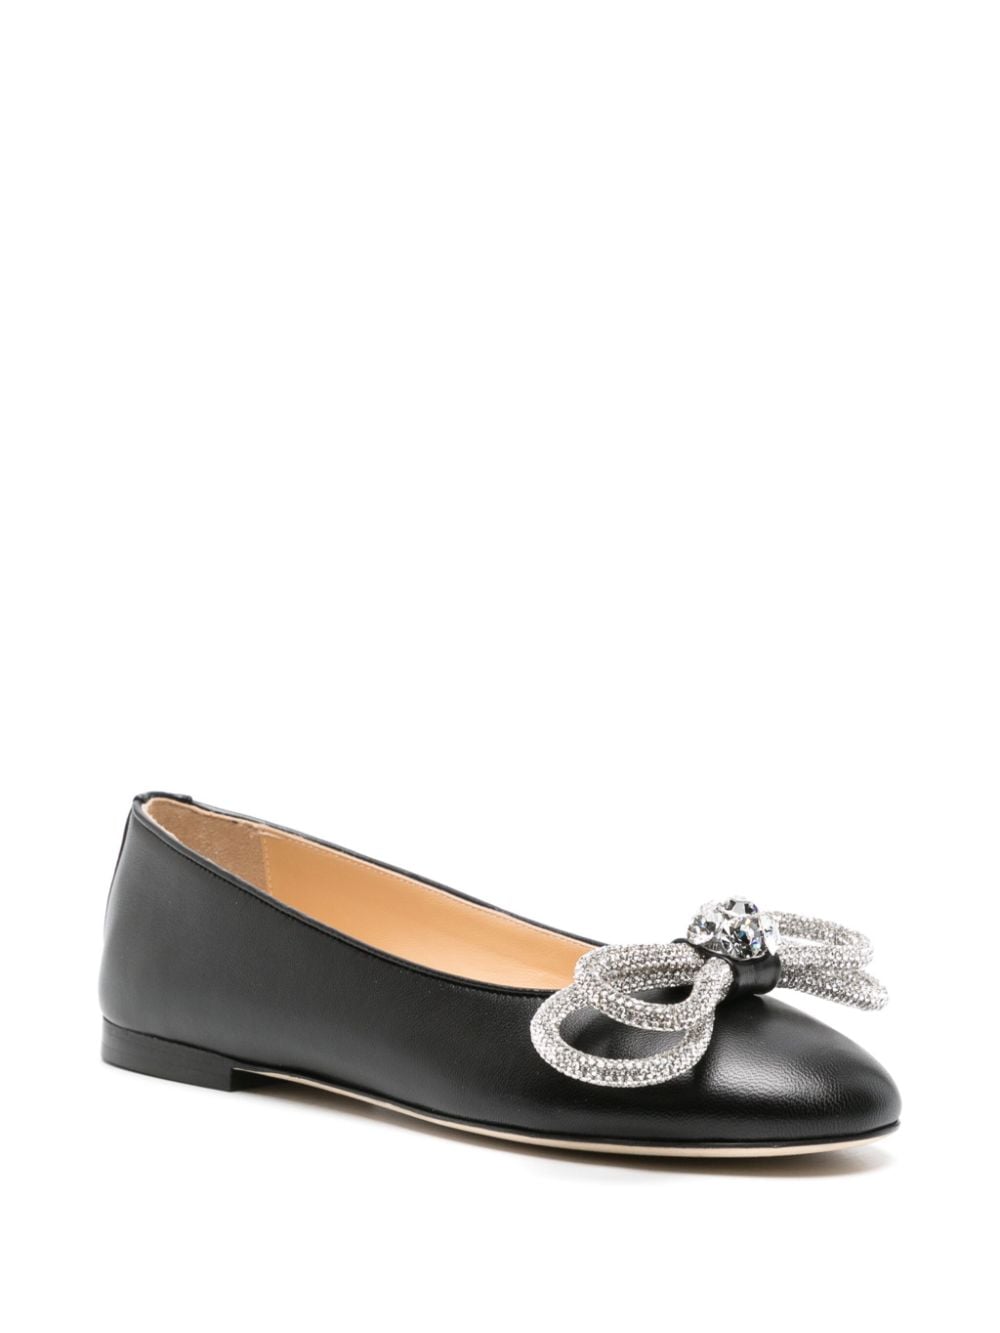 Shop Mach & Mach Double Bow Leather Ballerina Shoes In Black